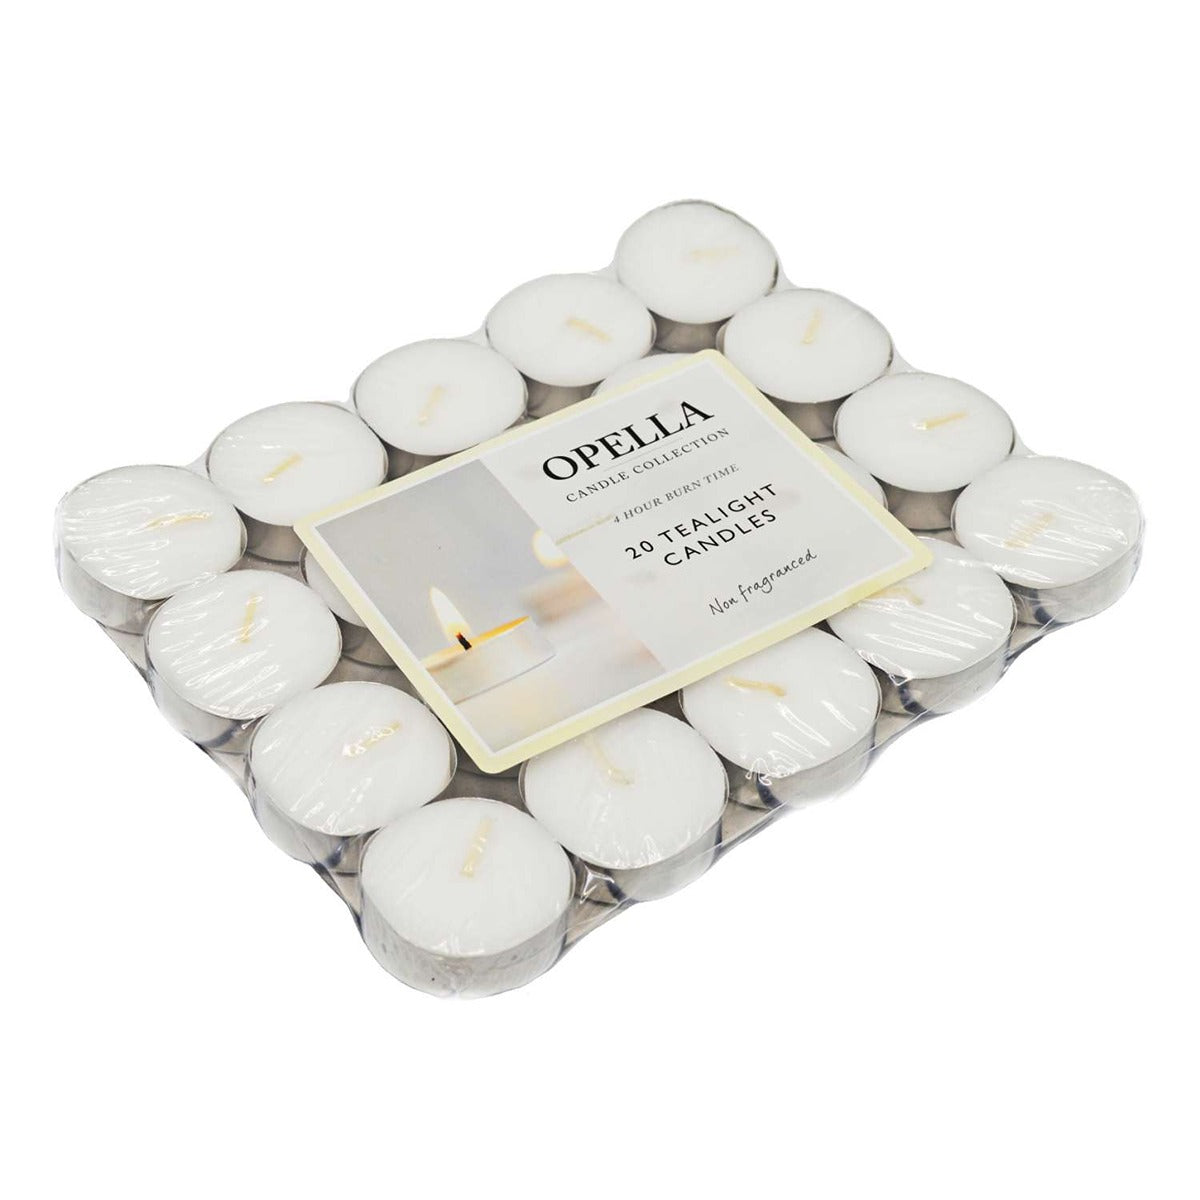 Opella - Tealight Candles - Pack of 20 - Continental Food Store